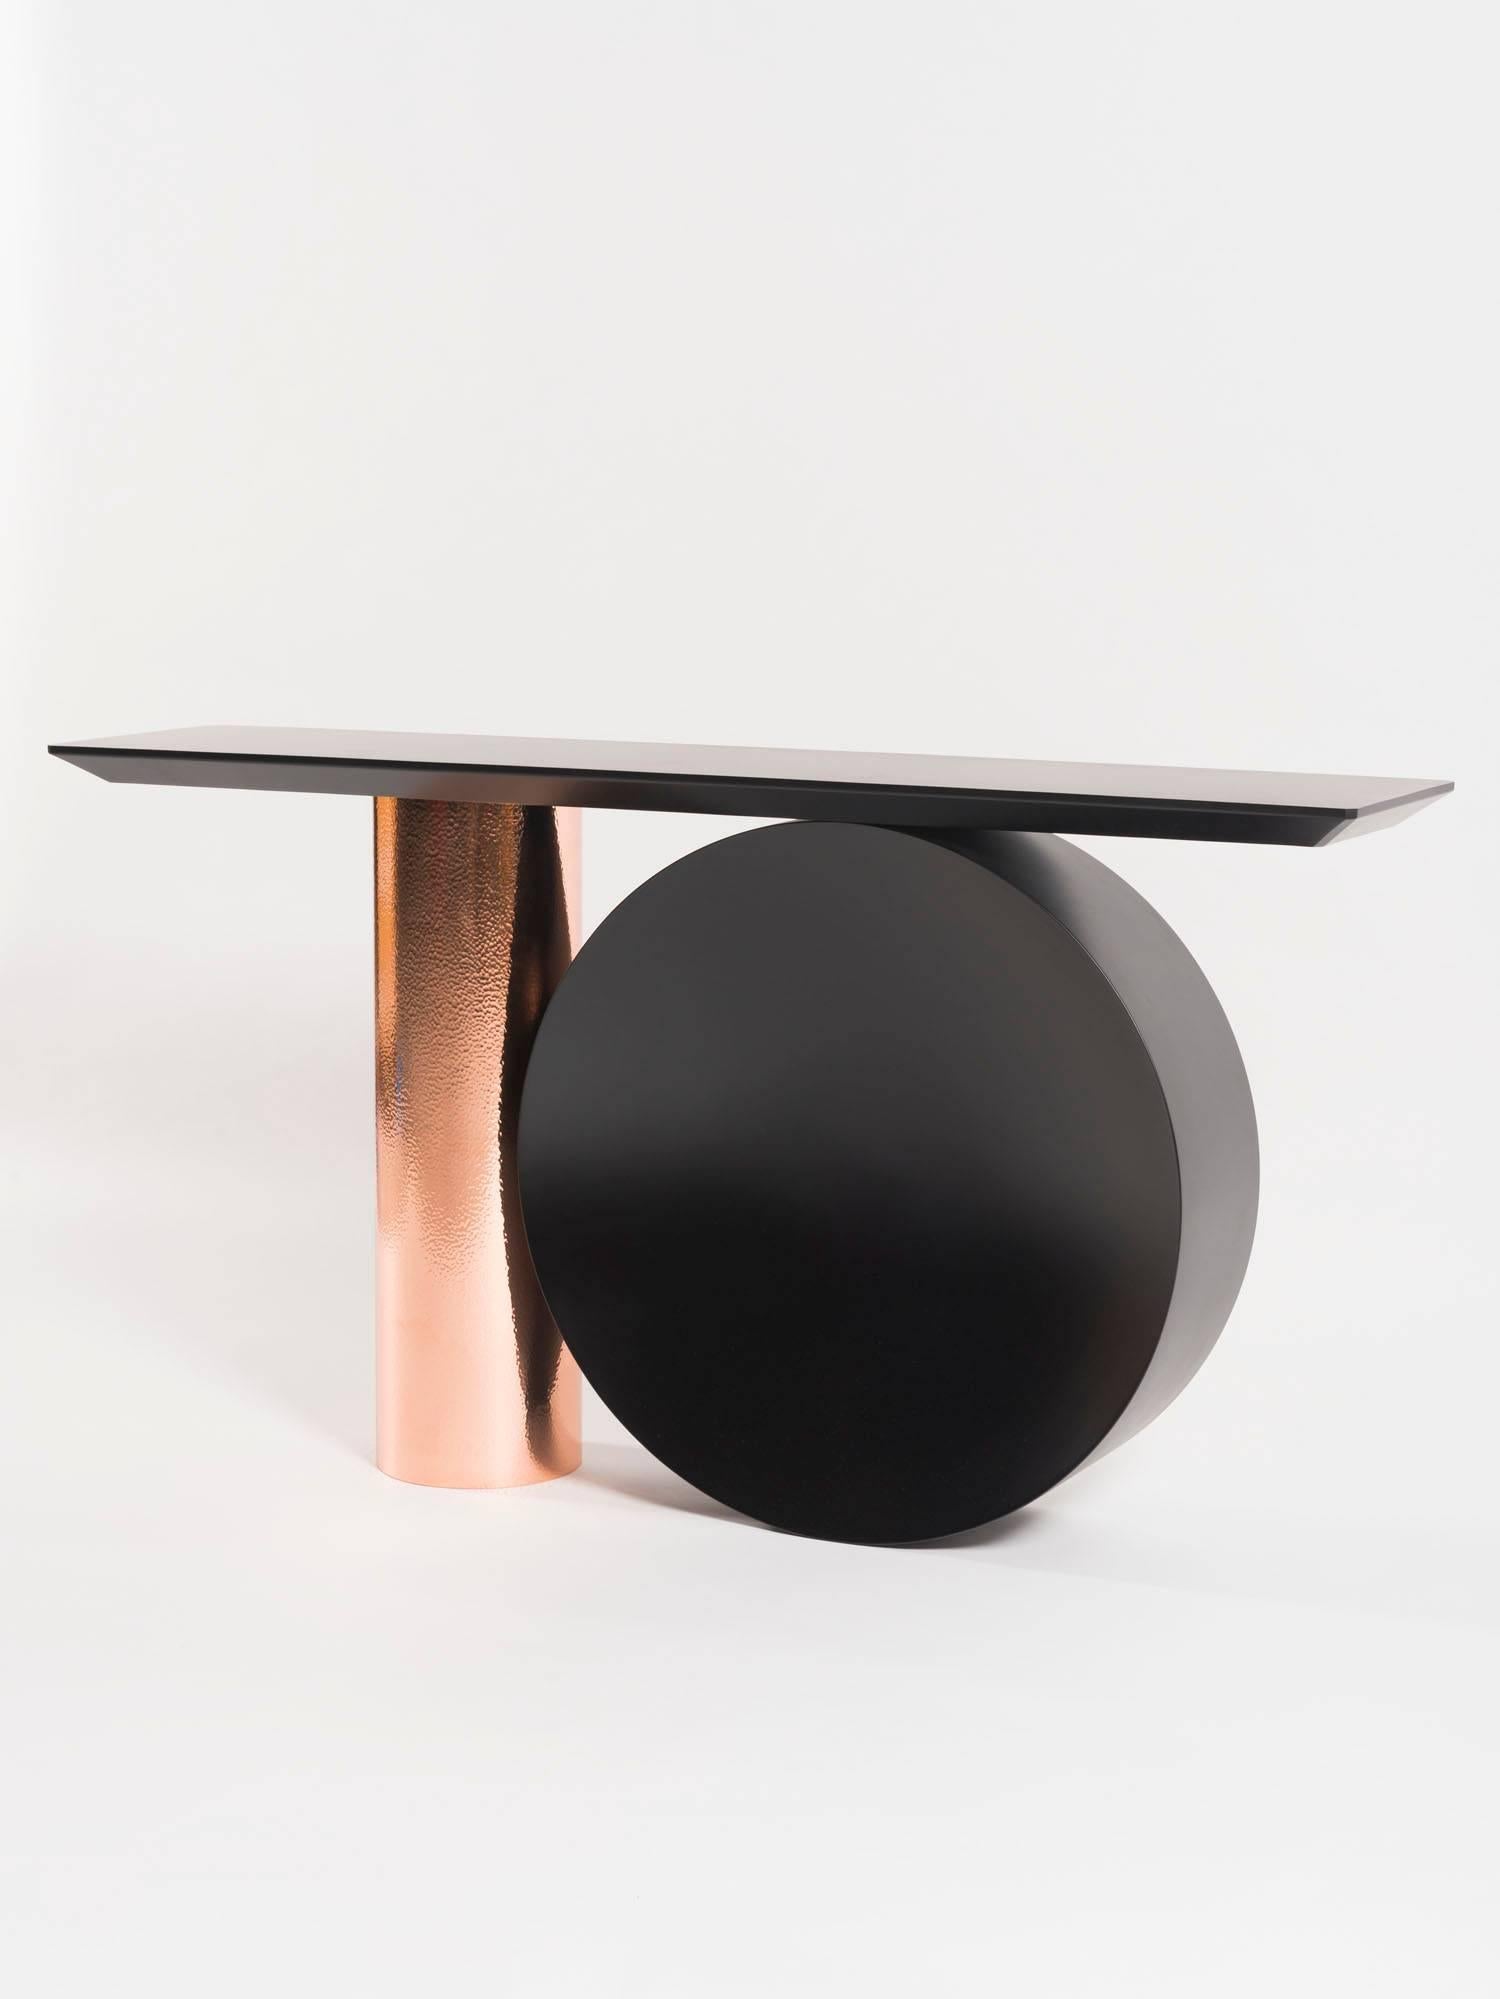 Tambour (drum in English) plays with the visual imbalance in its assembly which ensures its stability.

Materials:
Console base in hammered copper and black lacquered metal
Console top in black lacquered metal.